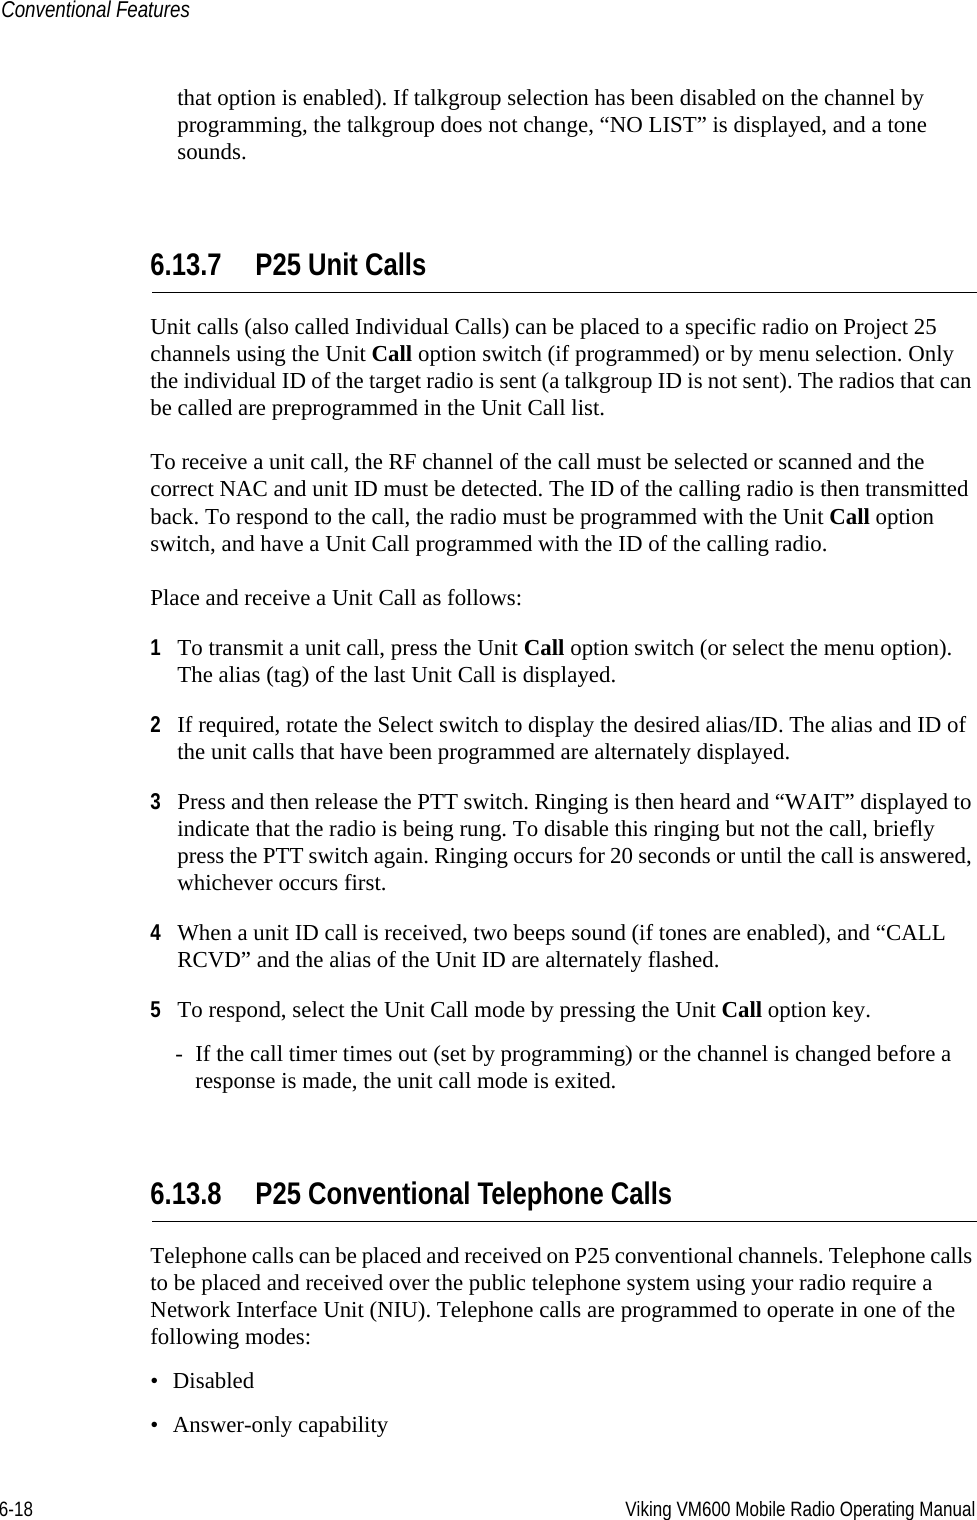 6-18 Viking VM600 Mobile Radio Operating ManualConventional Featuresthat option is enabled). If talkgroup selection has been disabled on the channel by programming, the talkgroup does not change, “NO LIST” is displayed, and a tone sounds.6.13.7 P25 Unit CallsUnit calls (also called Individual Calls) can be placed to a specific radio on Project 25 channels using the Unit Call option switch (if programmed) or by menu selection. Only the individual ID of the target radio is sent (a talkgroup ID is not sent). The radios that can be called are preprogrammed in the Unit Call list.To receive a unit call, the RF channel of the call must be selected or scanned and the correct NAC and unit ID must be detected. The ID of the calling radio is then transmitted back. To respond to the call, the radio must be programmed with the Unit Call option switch, and have a Unit Call programmed with the ID of the calling radio.Place and receive a Unit Call as follows:1To transmit a unit call, press the Unit Call option switch (or select the menu option). The alias (tag) of the last Unit Call is displayed.2If required, rotate the Select switch to display the desired alias/ID. The alias and ID of the unit calls that have been programmed are alternately displayed.3Press and then release the PTT switch. Ringing is then heard and “WAIT” displayed to indicate that the radio is being rung. To disable this ringing but not the call, briefly press the PTT switch again. Ringing occurs for 20 seconds or until the call is answered, whichever occurs first.4When a unit ID call is received, two beeps sound (if tones are enabled), and “CALL RCVD” and the alias of the Unit ID are alternately flashed.5To respond, select the Unit Call mode by pressing the Unit Call option key. - If the call timer times out (set by programming) or the channel is changed before a response is made, the unit call mode is exited.6.13.8 P25 Conventional Telephone CallsTelephone calls can be placed and received on P25 conventional channels. Telephone calls to be placed and received over the public telephone system using your radio require a Network Interface Unit (NIU). Telephone calls are programmed to operate in one of the following modes:• Disabled• Answer-only capabilityDraft 4/29/2014